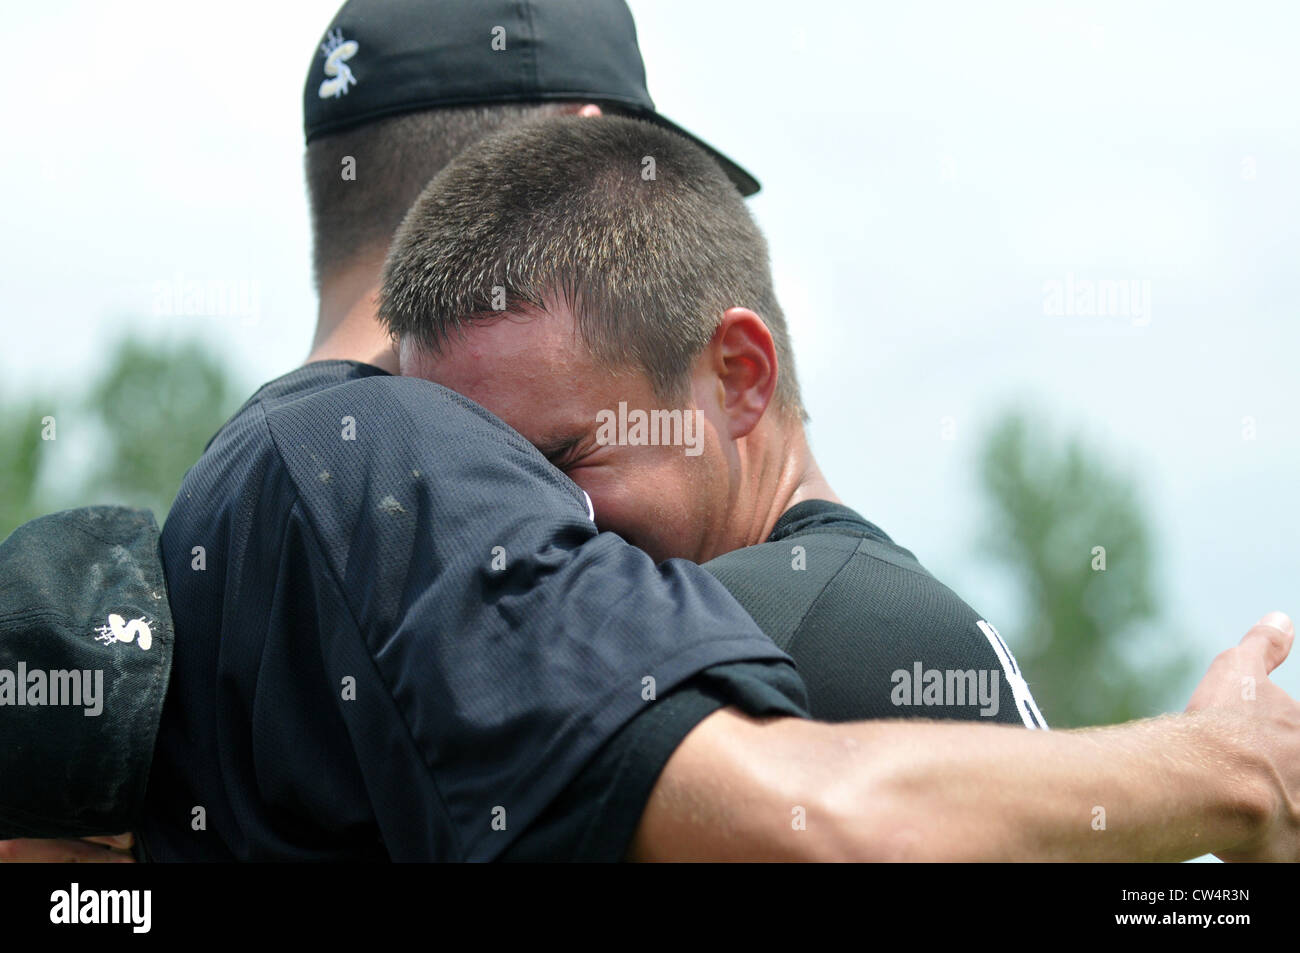 Baseball Two players embrace to celebrate the joy of a victory in winning a high school regional championship playoff game. USA. Stock Photo